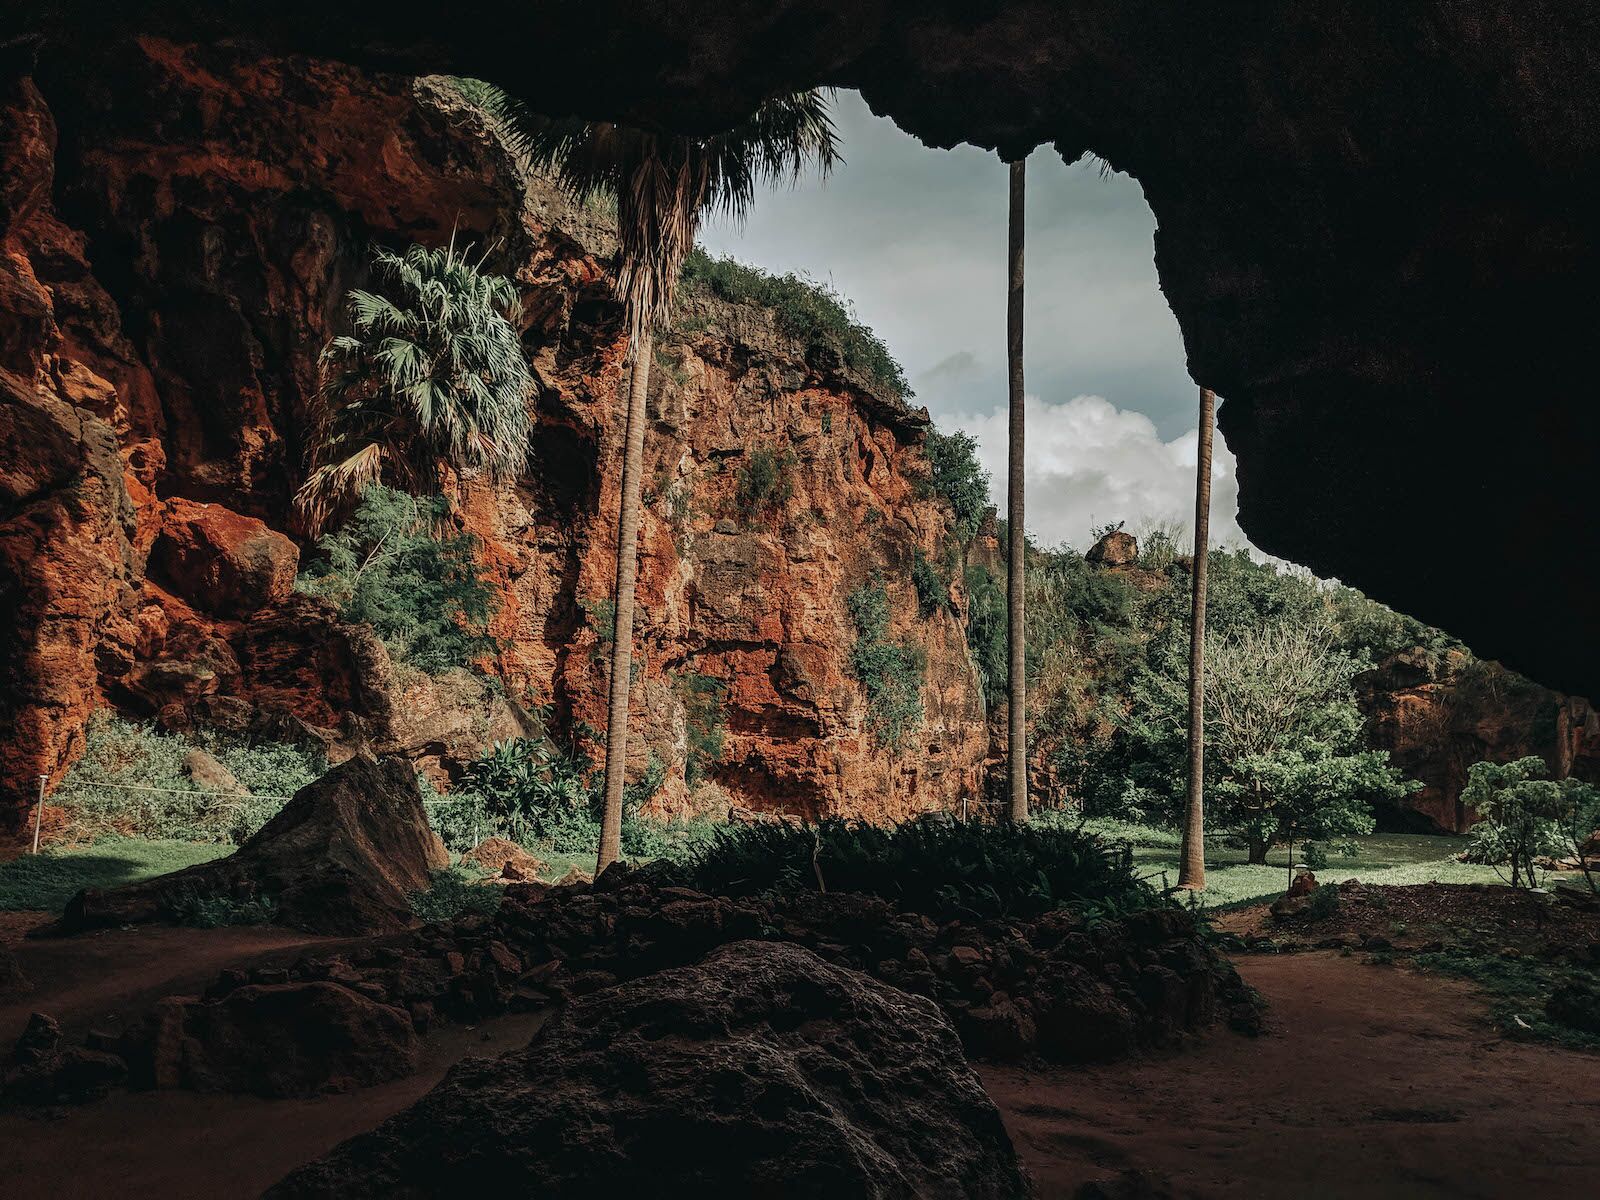 Looking from the inside of the cave out - one of the best hiking trails in hawaii on kauai